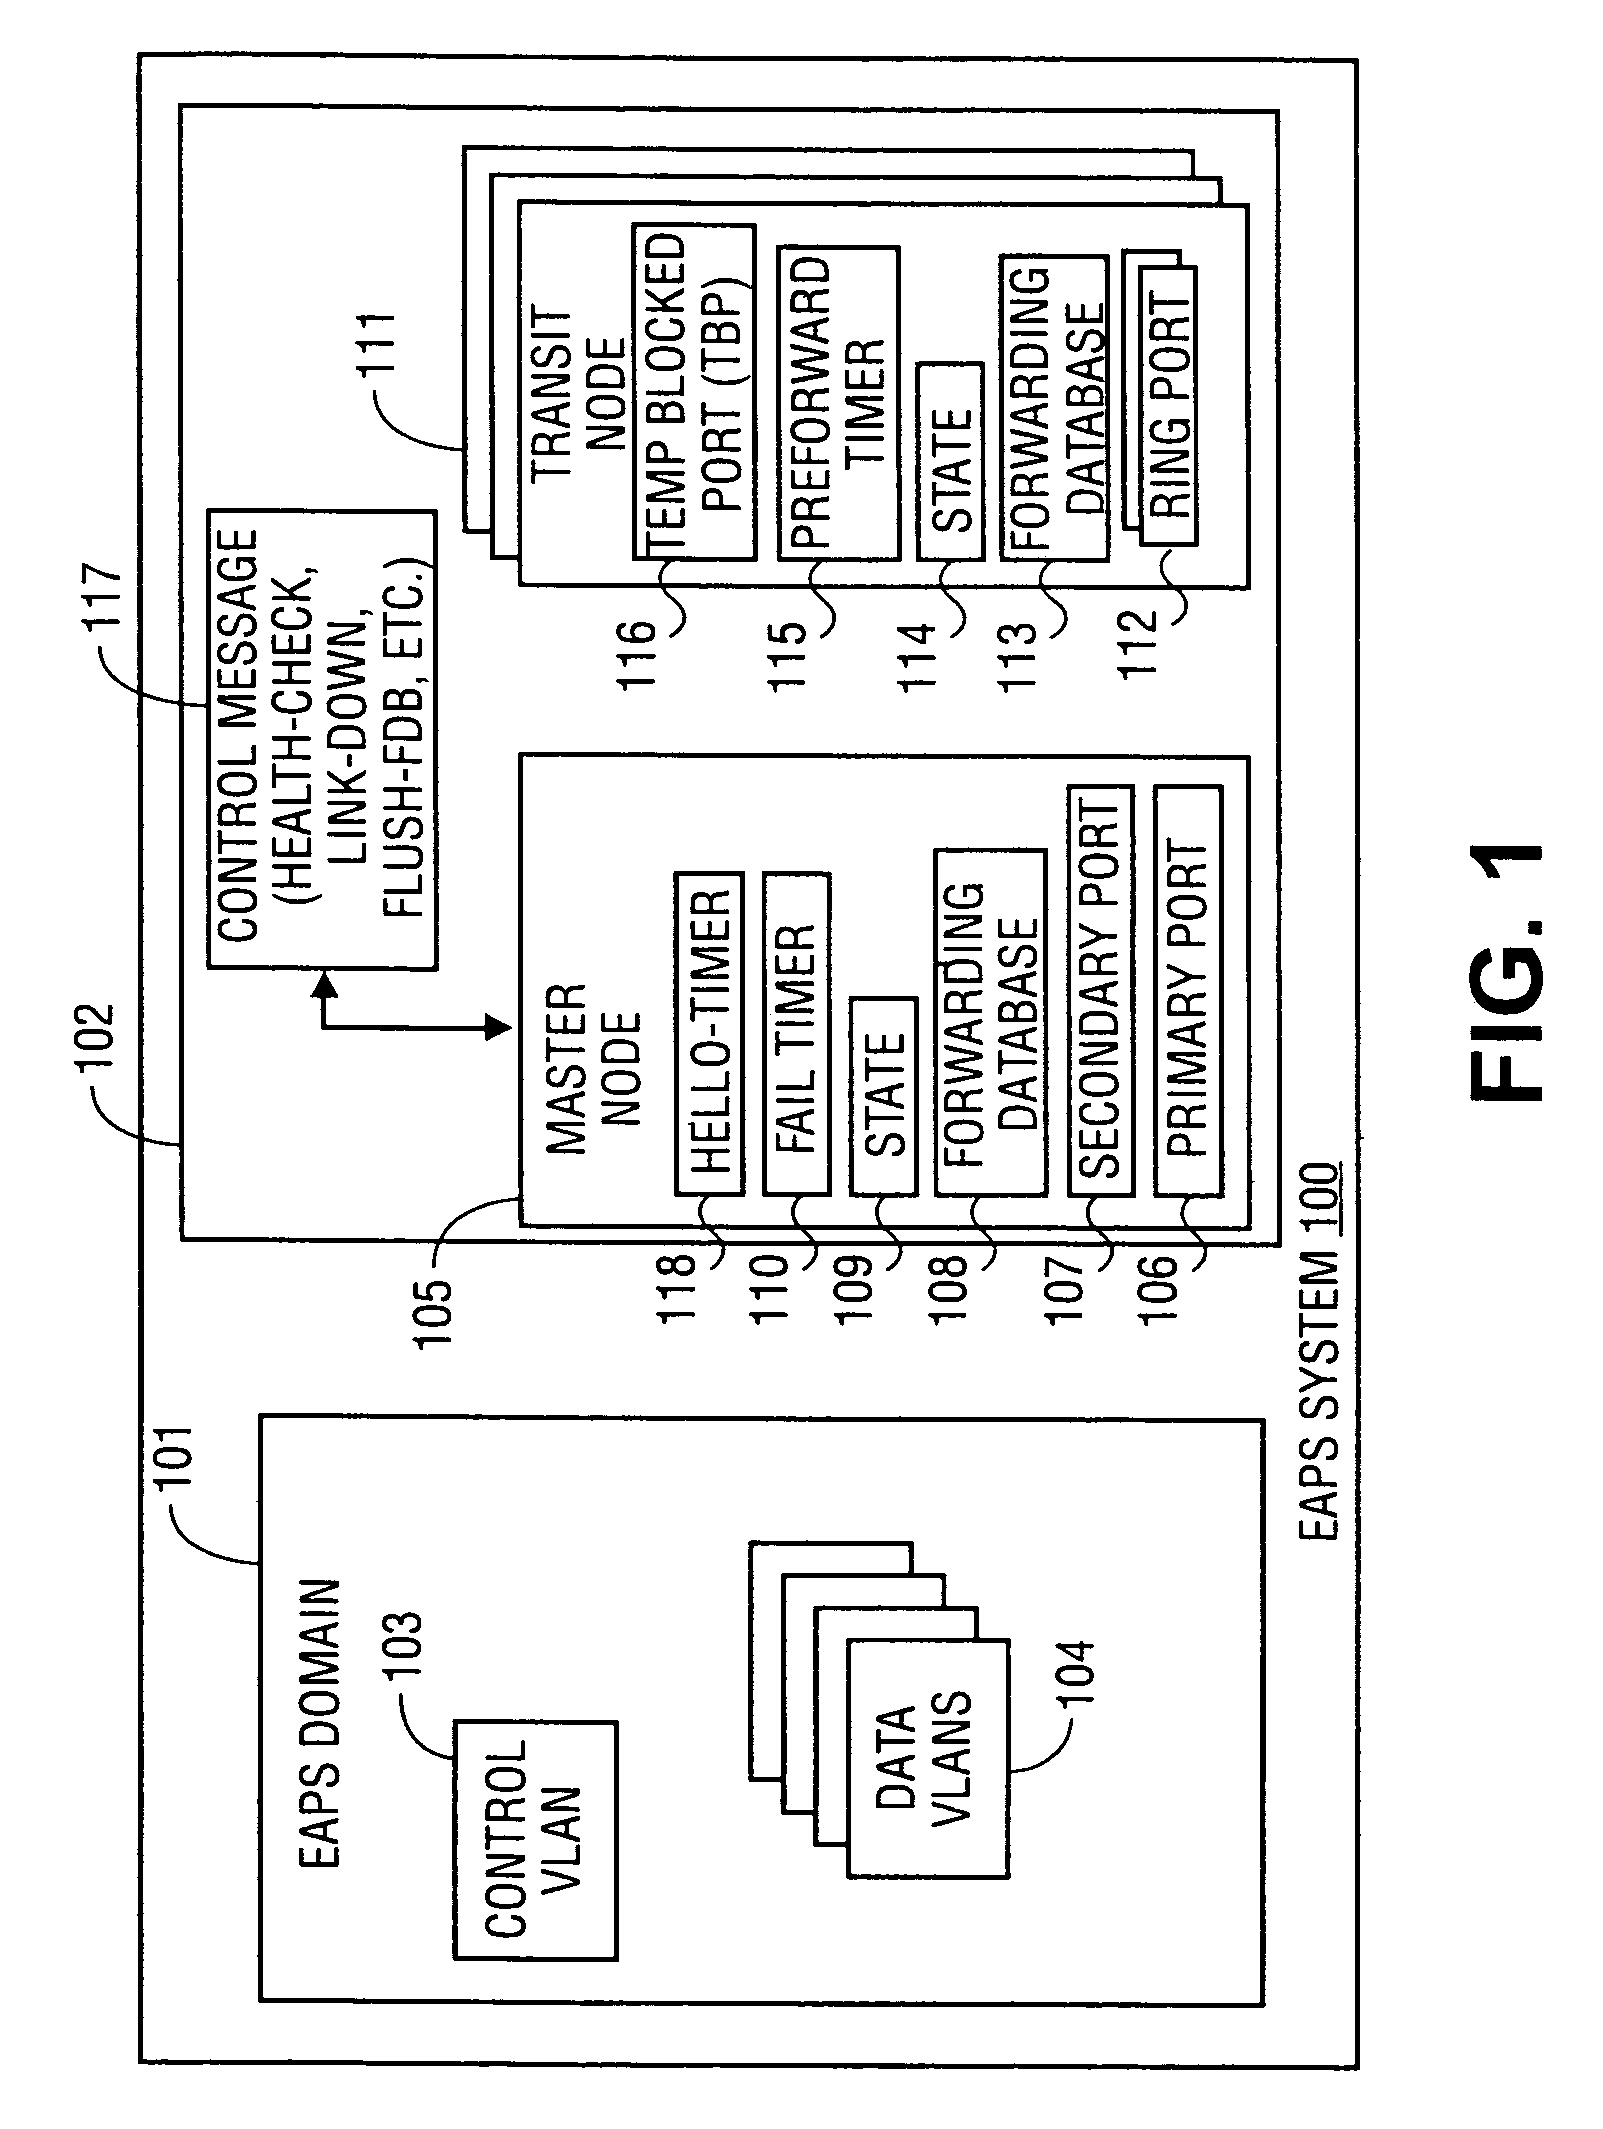 Ethernet automatic protection switching